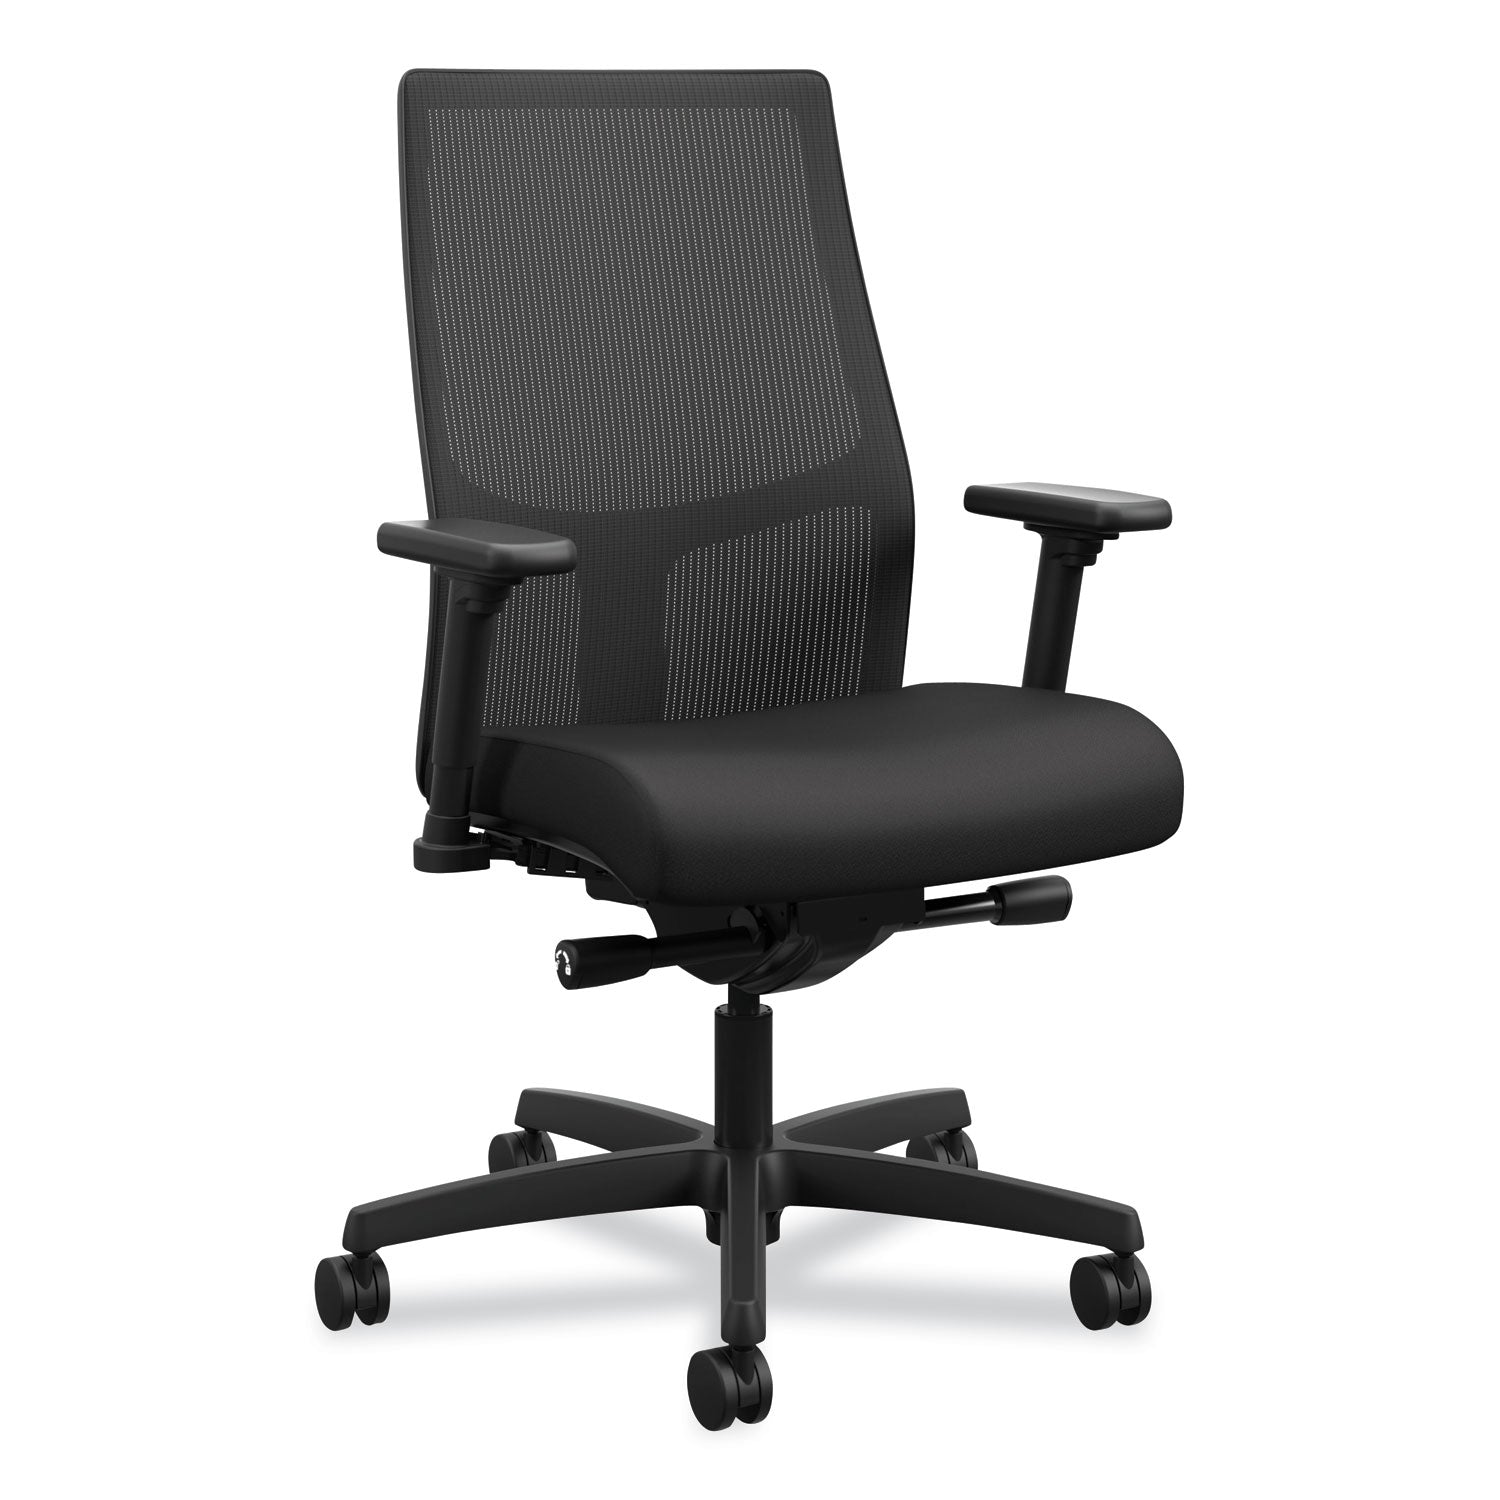 ignition-20-4-way-stretch-mid-back-mesh-task-chair-supports-300-lb-17-to-21-seat-height-black-seat-back-black-base_honi2m2amnc10tk - 1